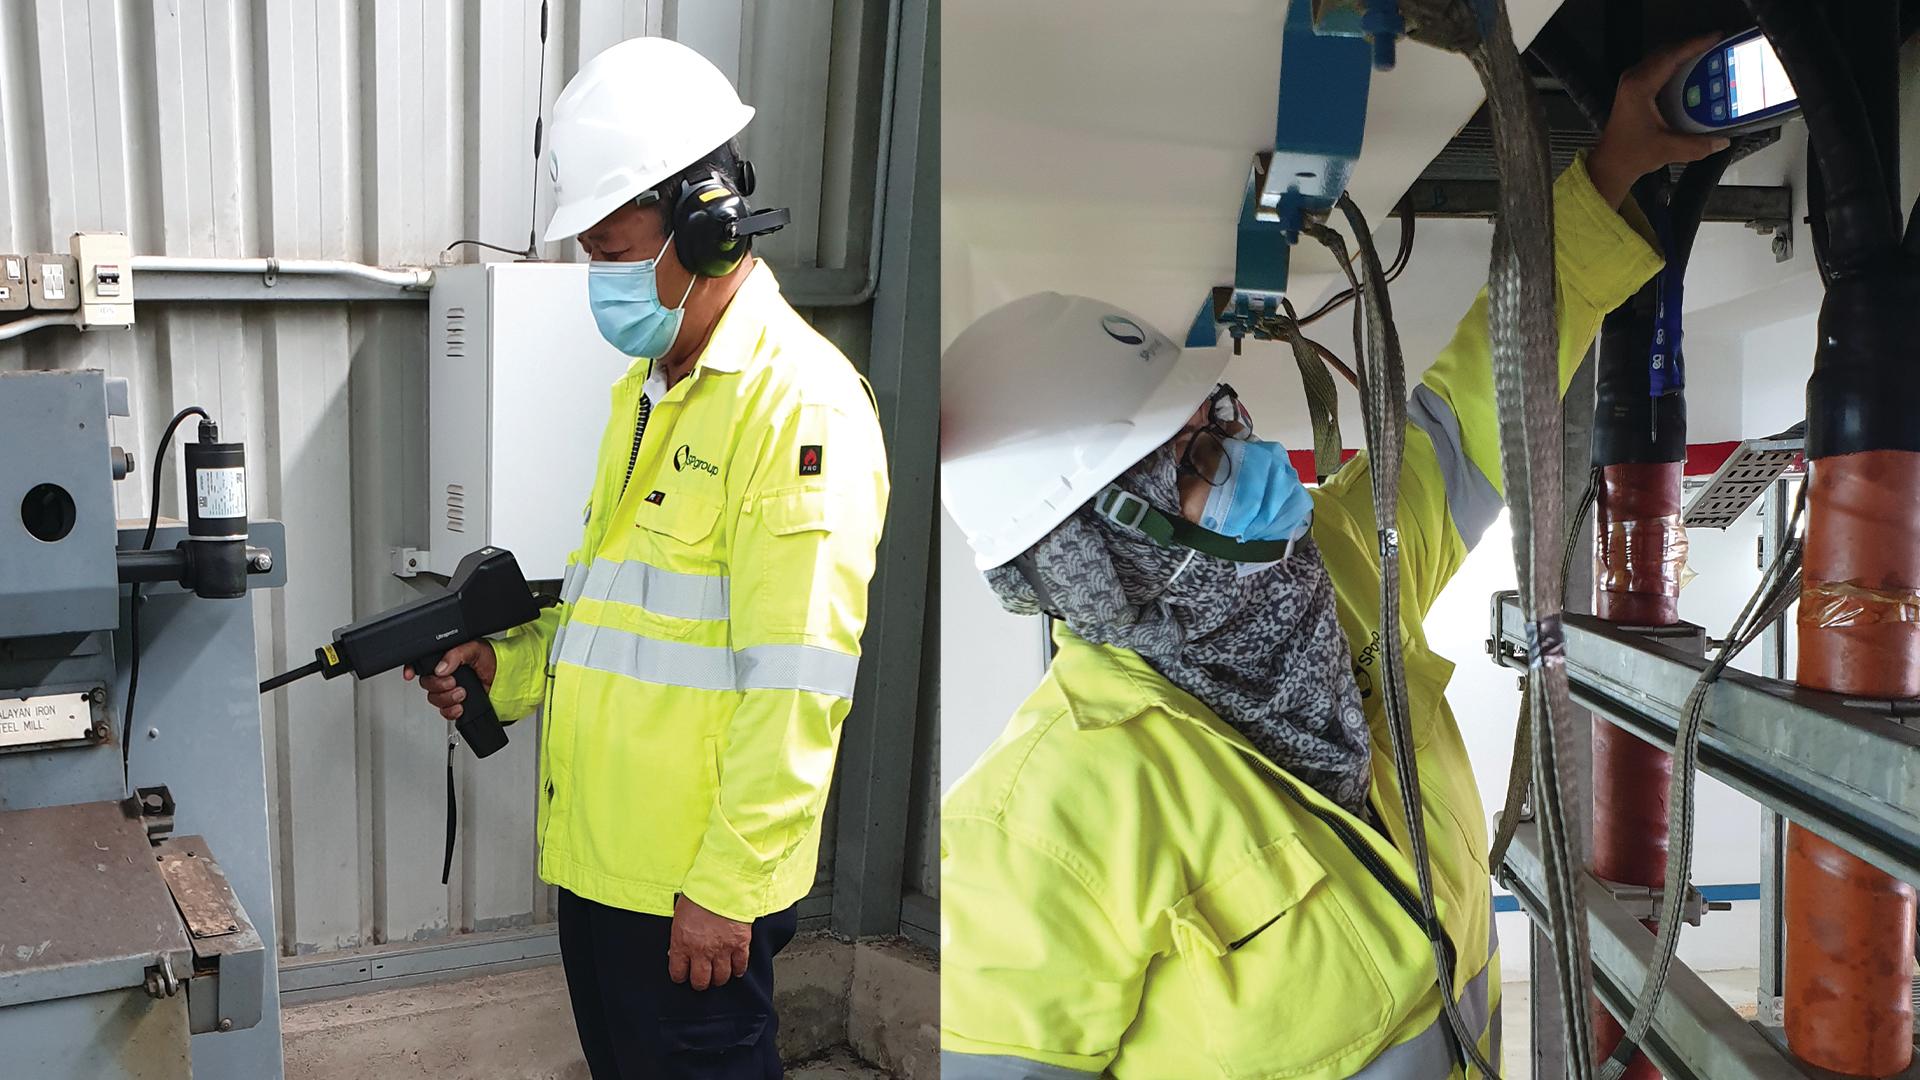 aizan and her colleagues use handheld detectors to detect for abnormalities in the network. This is to prevent faults from developing and causing power disruptions.